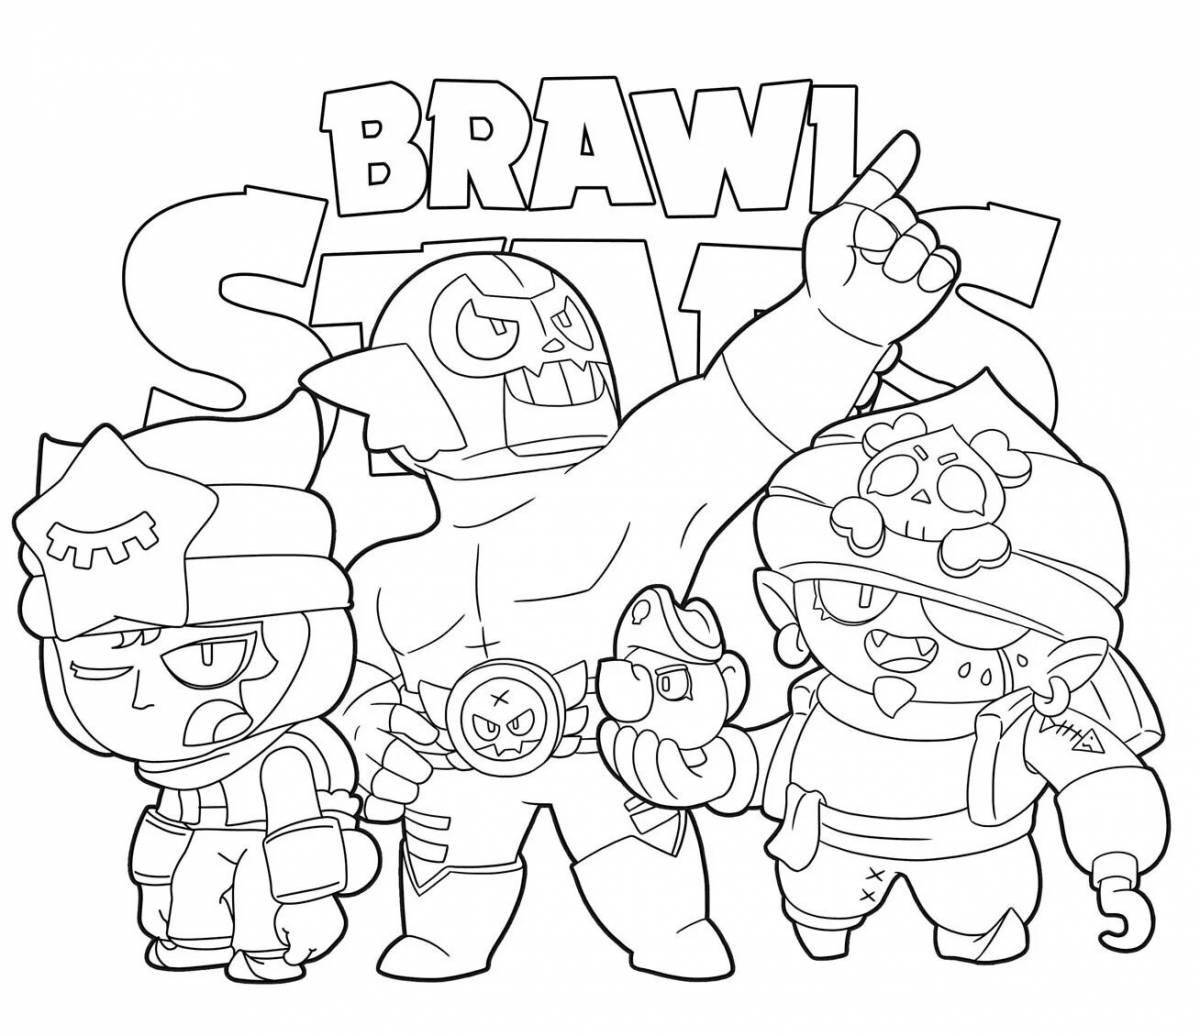 Coloring playful griff brawl stars